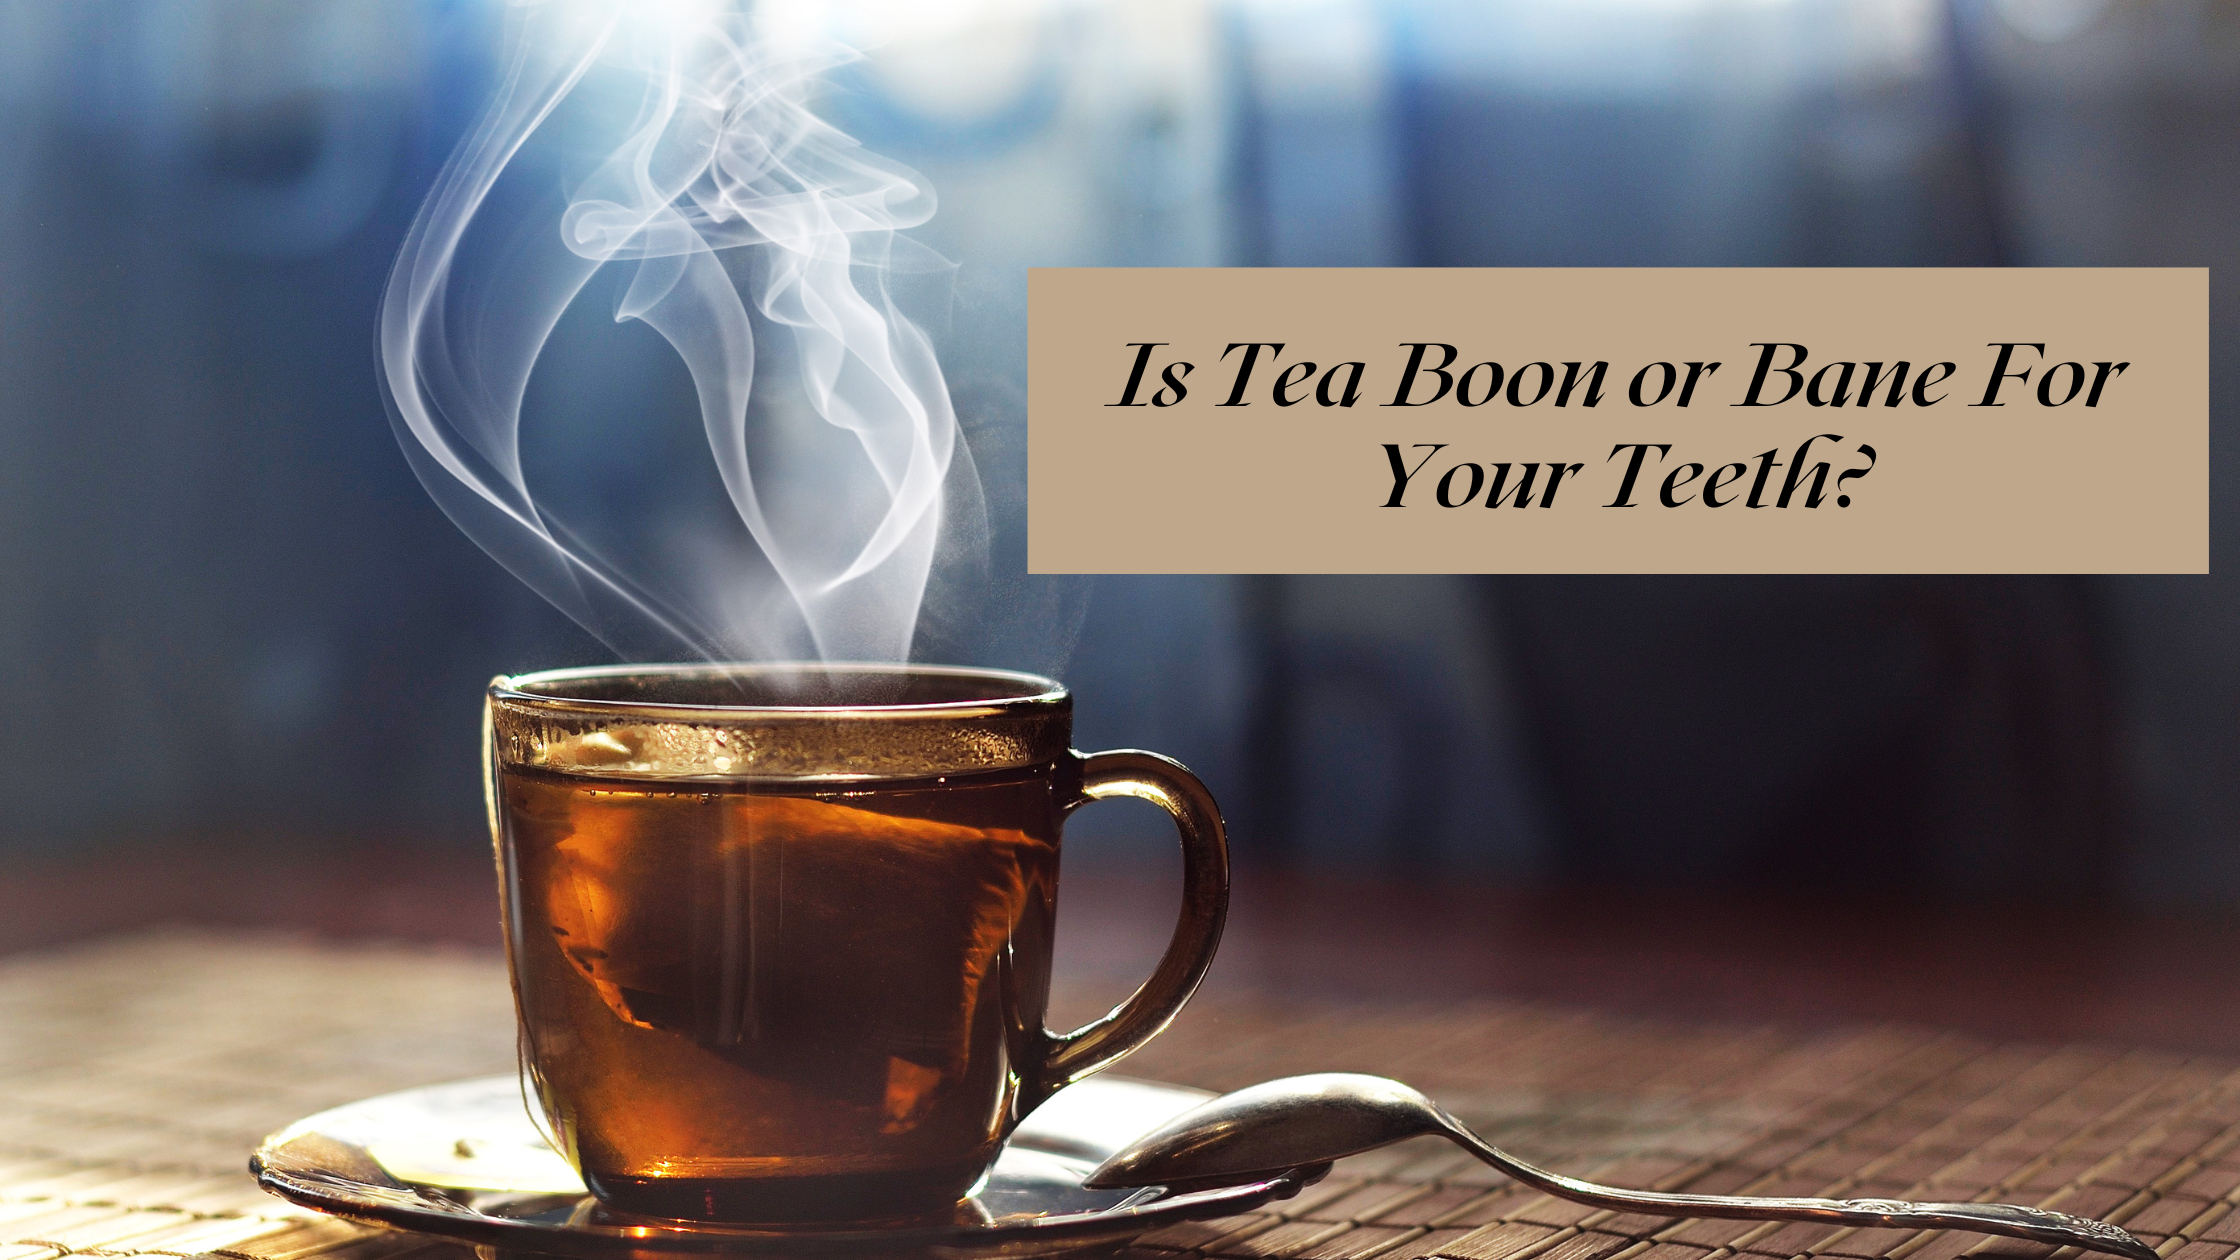 Is Tea Boon or Bane For Your Teeth?